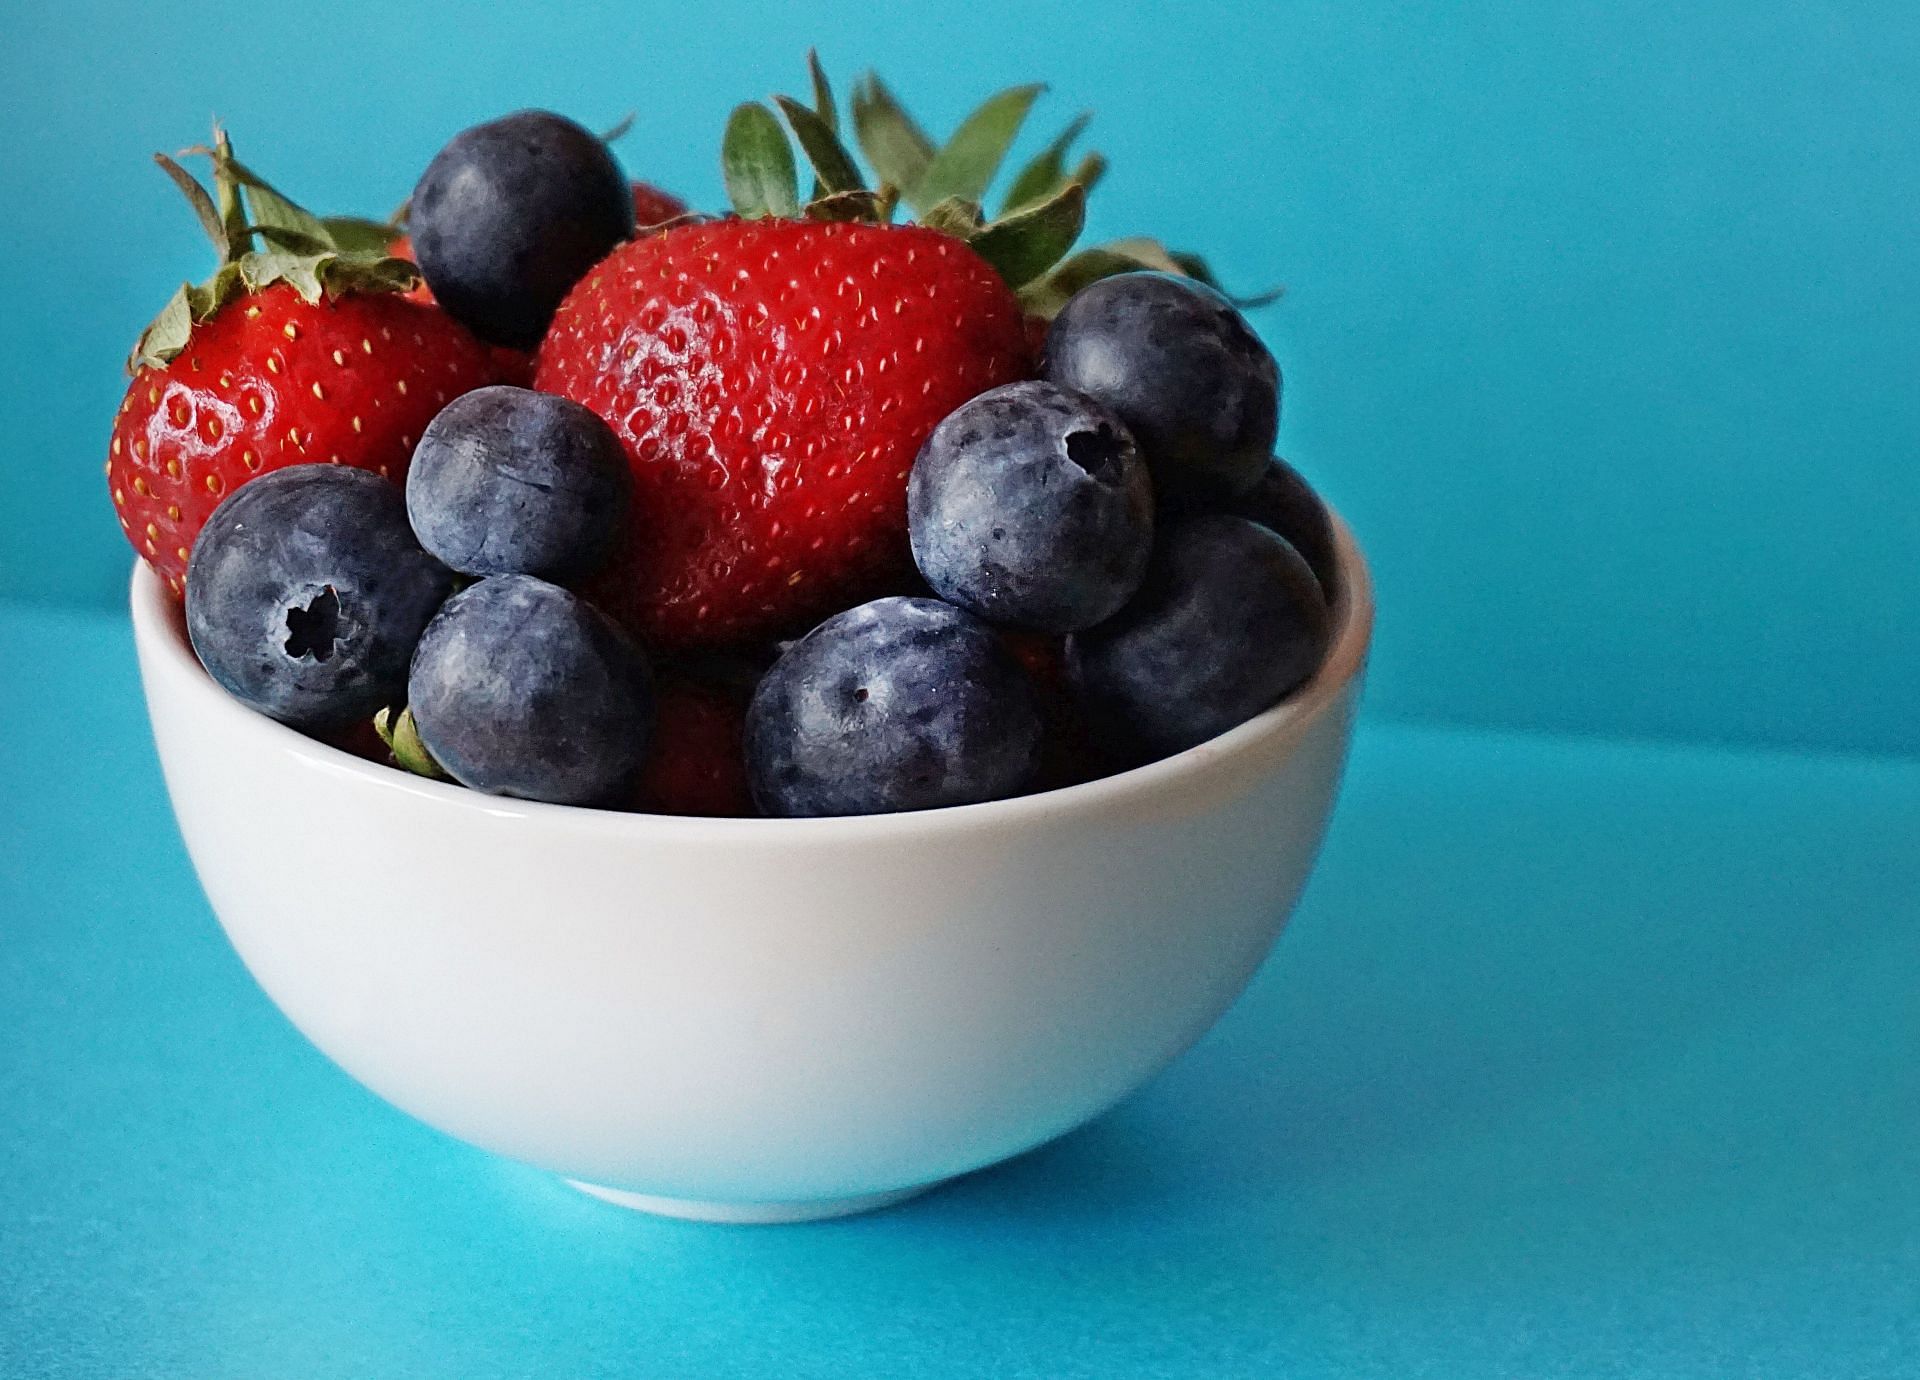 Berries are also good for glowing skin. (Image via Pexels/Suzy Hazelwood)